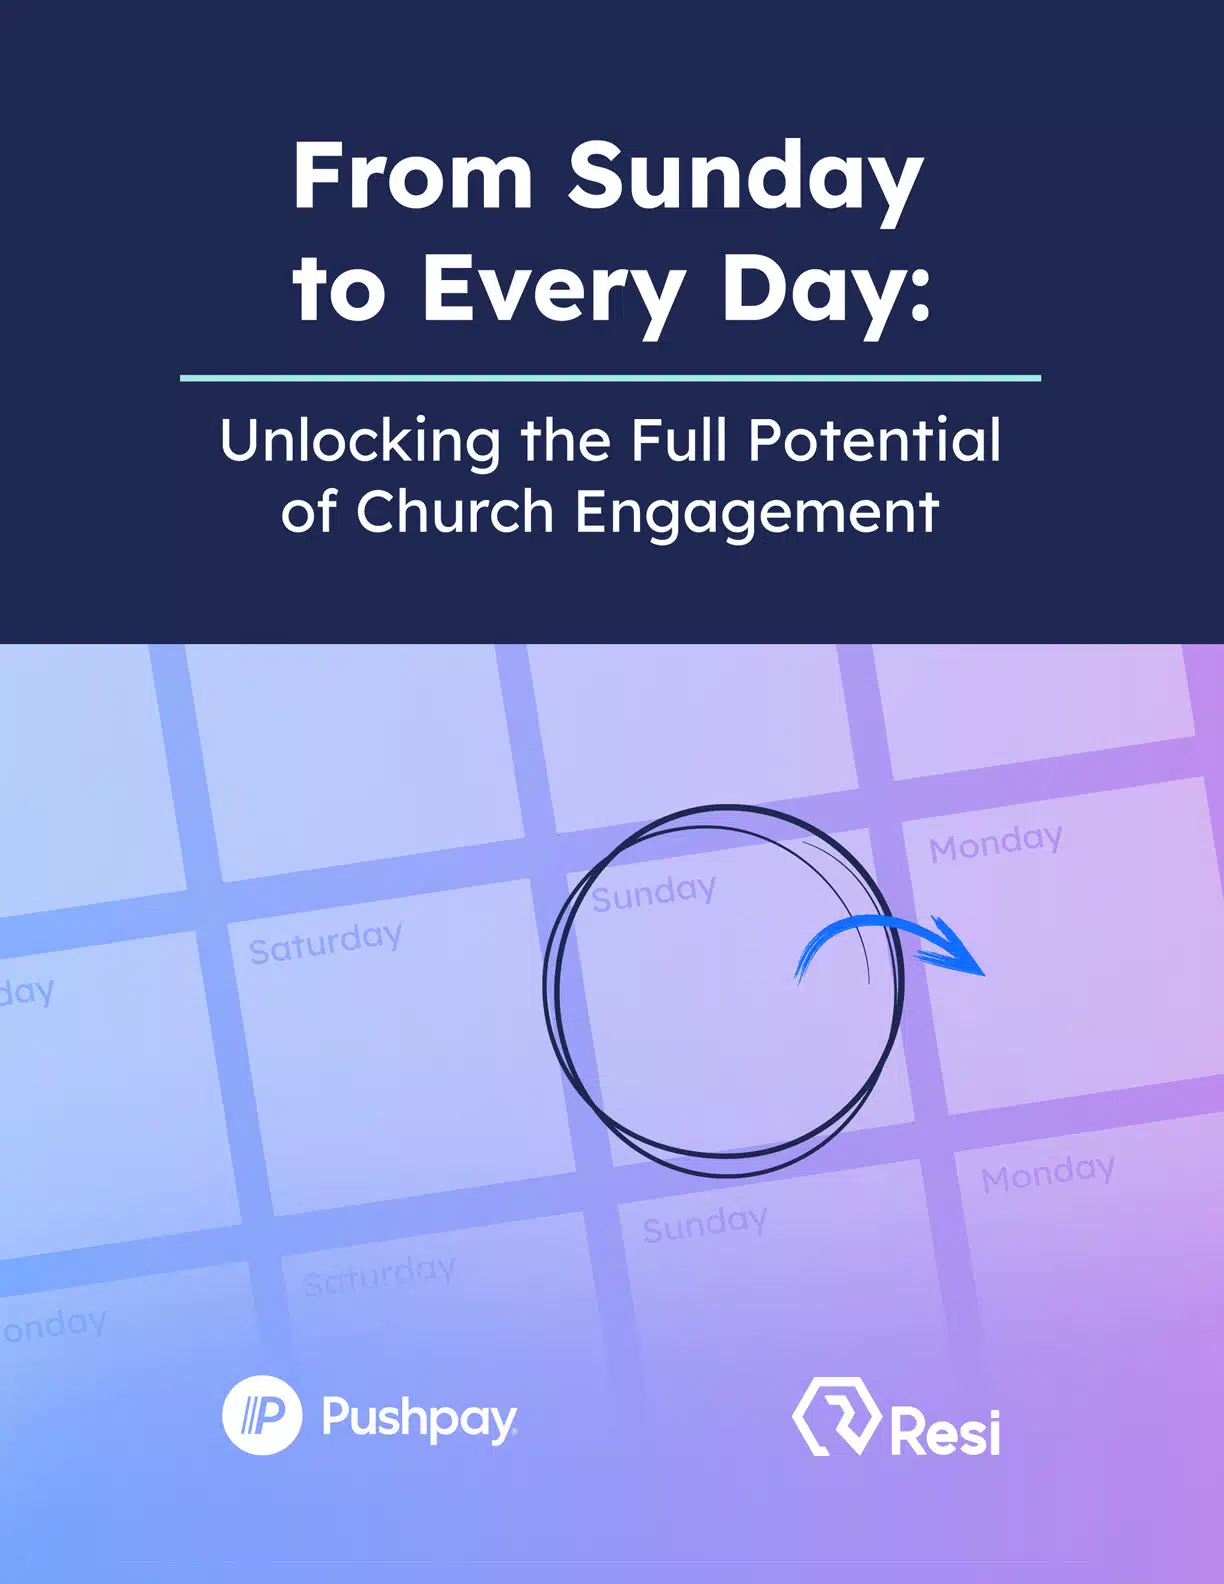 From Sunday to Every Day: unlocking the full potential of church engagement